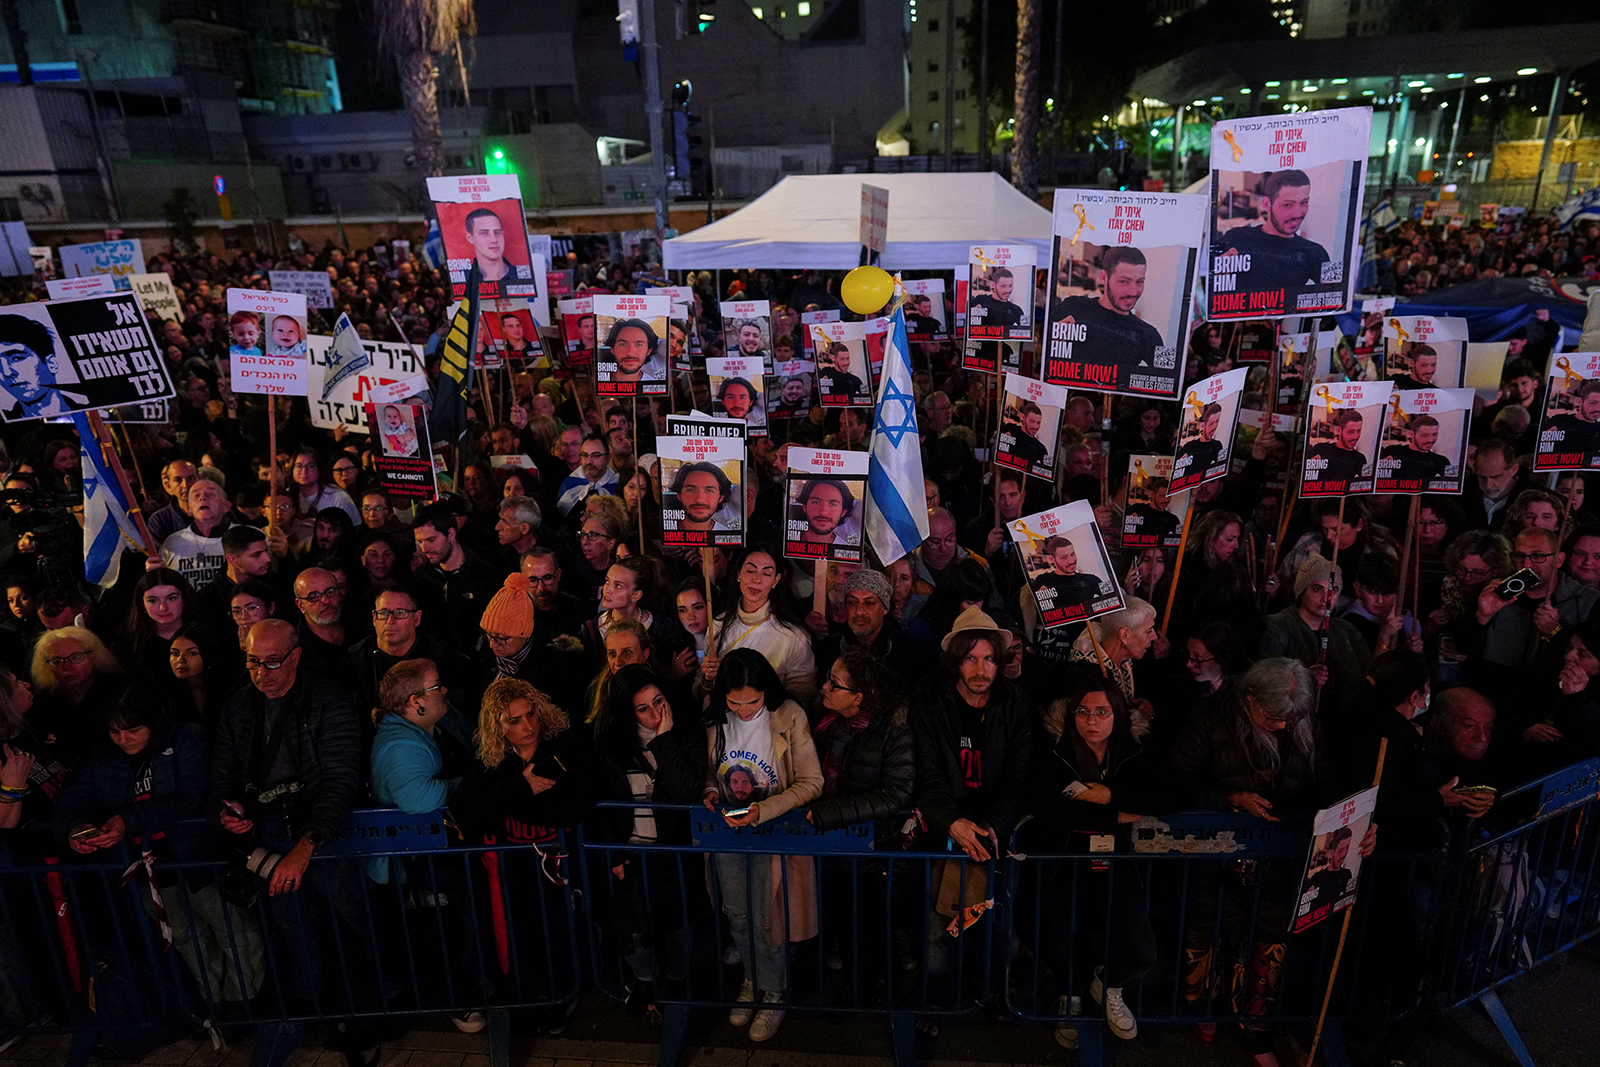 Demonstrators gathered for a 24-hour protest at "Hostages Square", calling for the release of Israeli hostages in Gaza and to mark 100 days since the October 7 attack by Palestinian Islamist group Hamas, amid the ongoing conflict between Israel and Hamas, in Tel Aviv, Israel, on January 13.